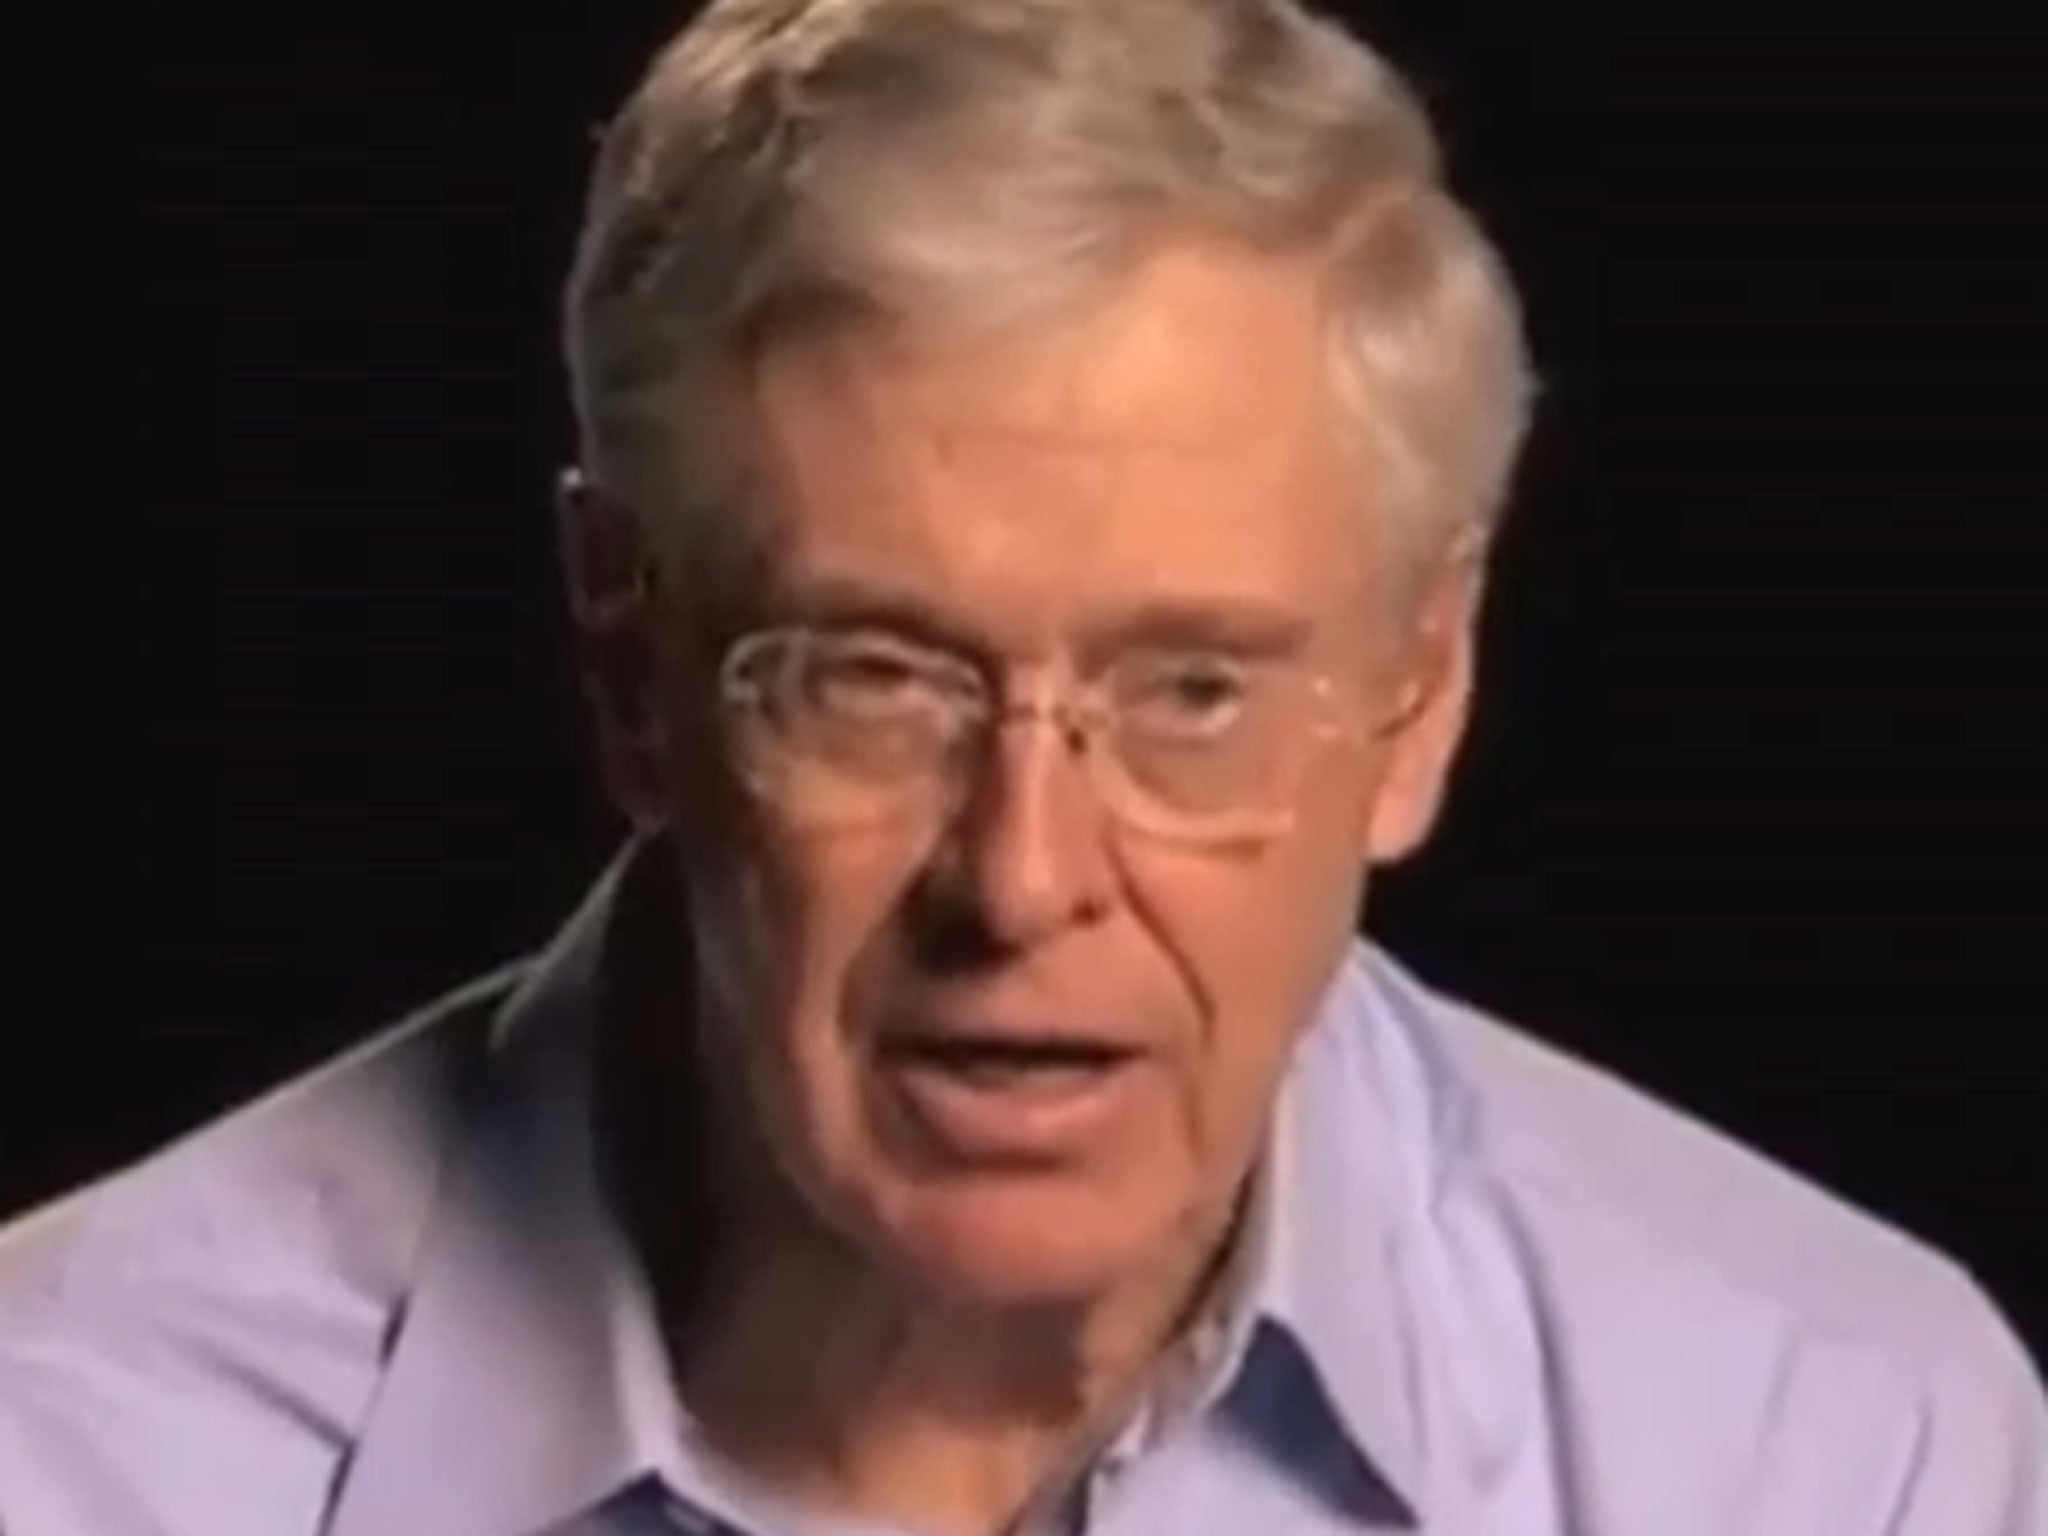 Charles Koch has 'bankrolled' Republicans for years